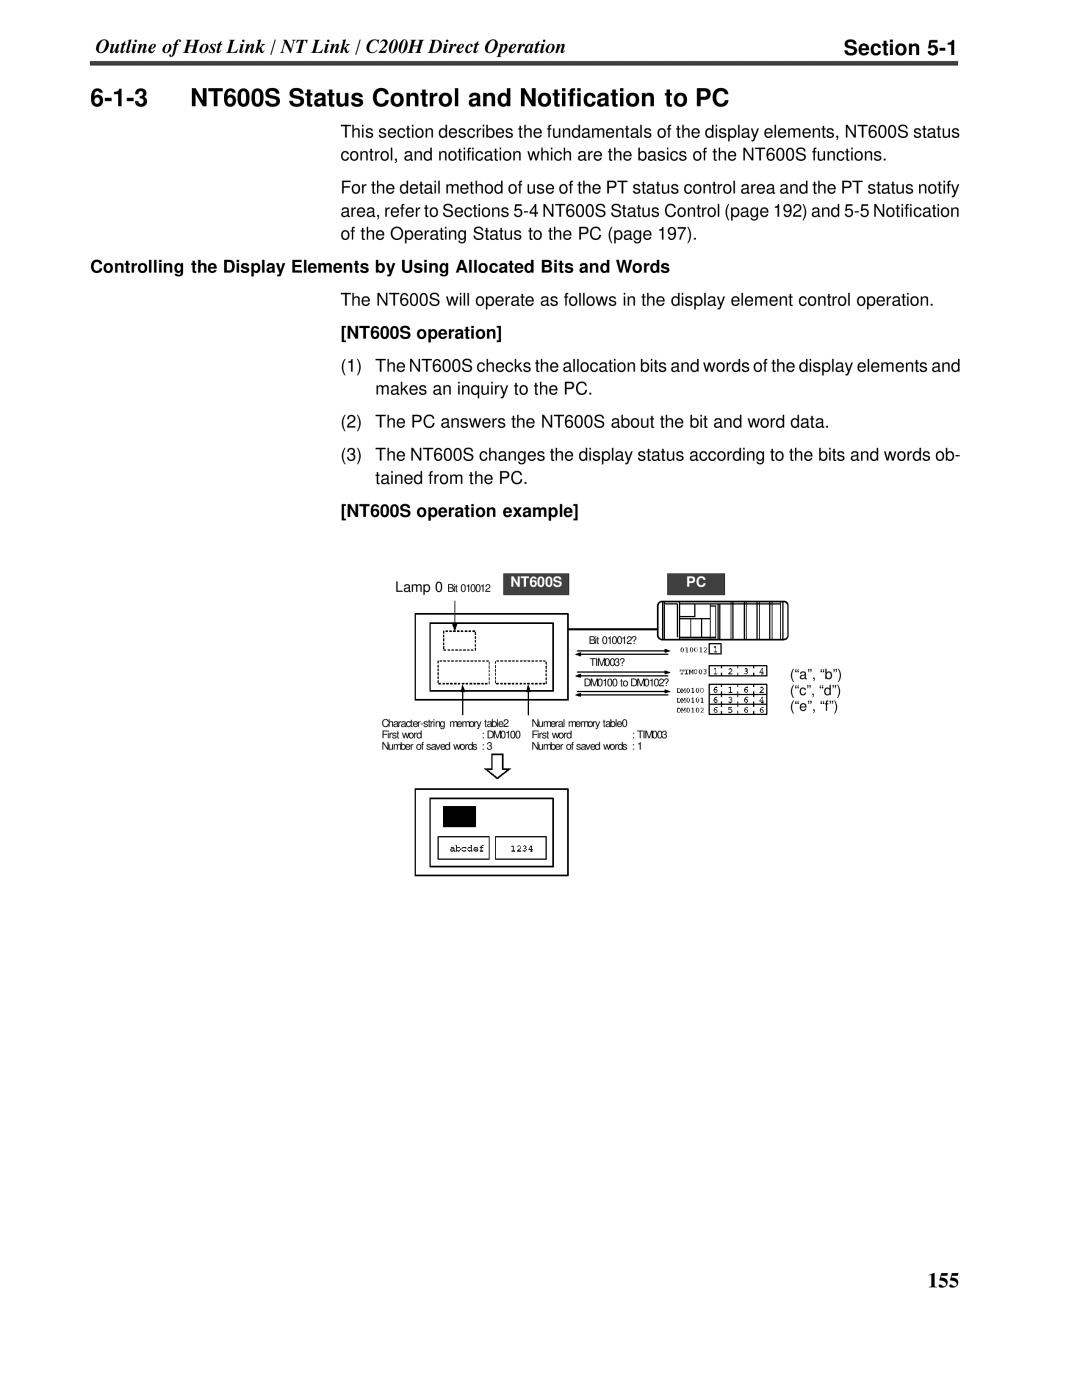 Omron V022-E3-1 operation manual 6-1-3NT600S Status Control and Notification to PC, Section, NT600S operation example 